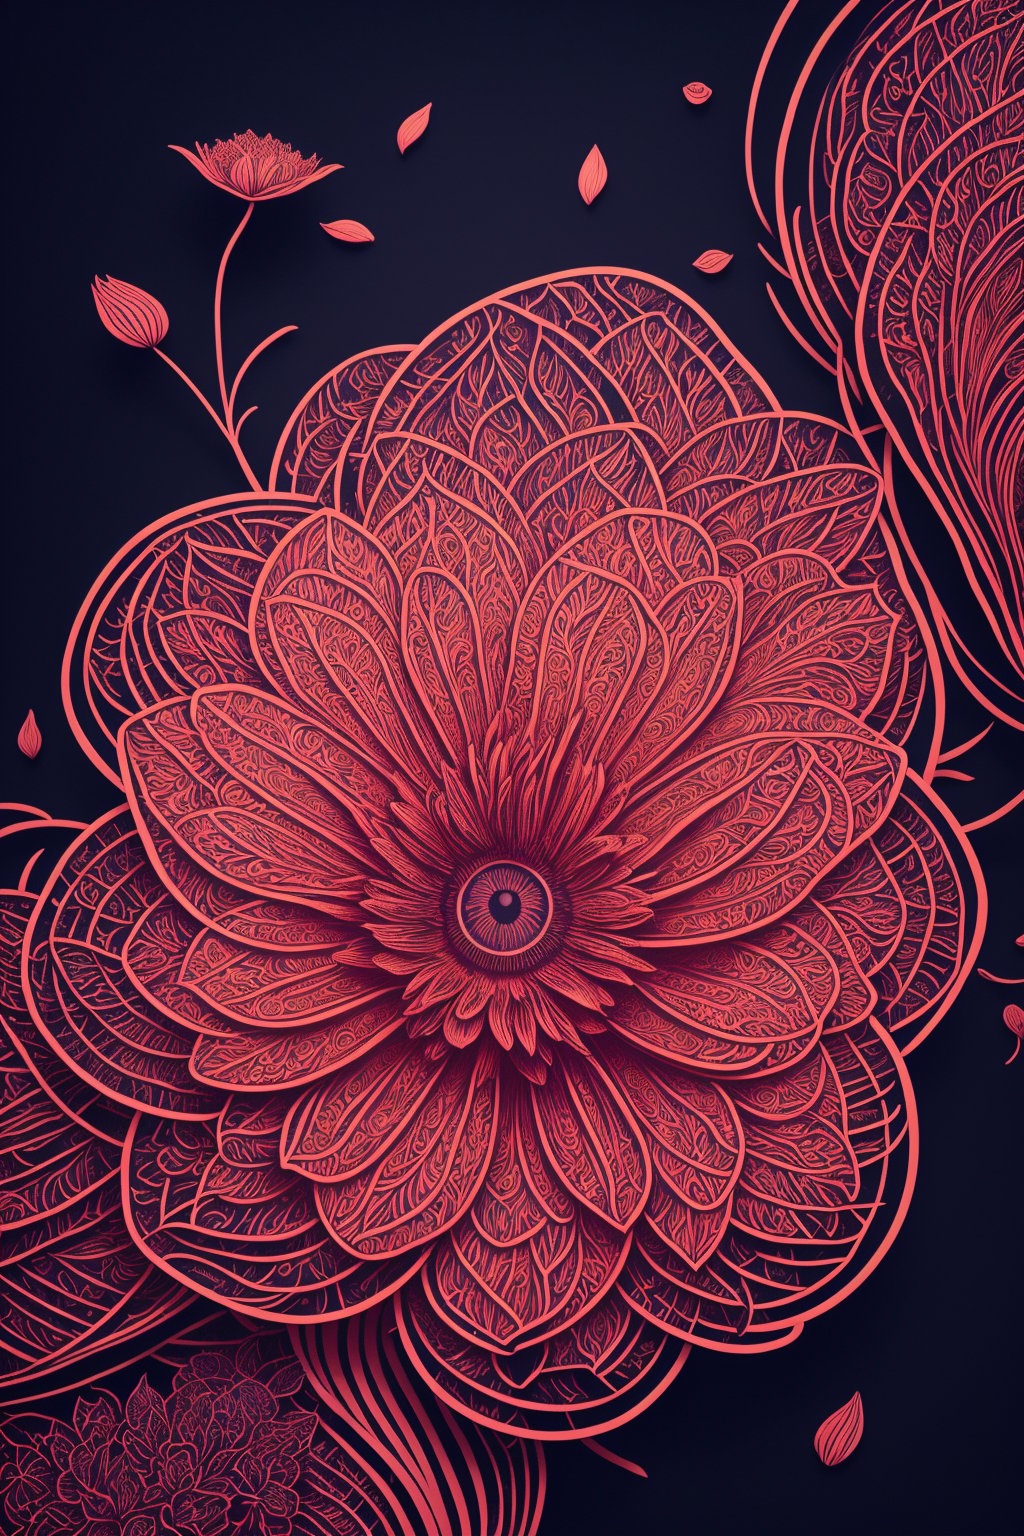 (best quality,4k,8k,highres,masterpiece:1.2),ultra-detailed,(realistic,photorealistic,photo-realistic:1.37),vector illustration,floral design,beautifully intricate flowers,vibrant color scheme,natural elements,hand-drawn style,fine linework,detailed petals,organic shapes,harmonious composition,botanical elements,delicate stems and leaves,element of symmetry and balance,playful and whimsical style,professional-grade digital illustration,vector graphics,attention to detail,exquisite craftsmanship,artistic interpretation,lush blossoms and buds,graceful curves and loops,rich textures and shades,depth and dimension,soft and flowing lines,stylized floral patterns,atmospheric lighting,gently diffused shadows,subtle gradients,creative use of negative space,eye-catching visual impact,expressive and engaging,pleasant and soothing,prominent focal point,layered and overlapping elements,diagonal and diagonal elements